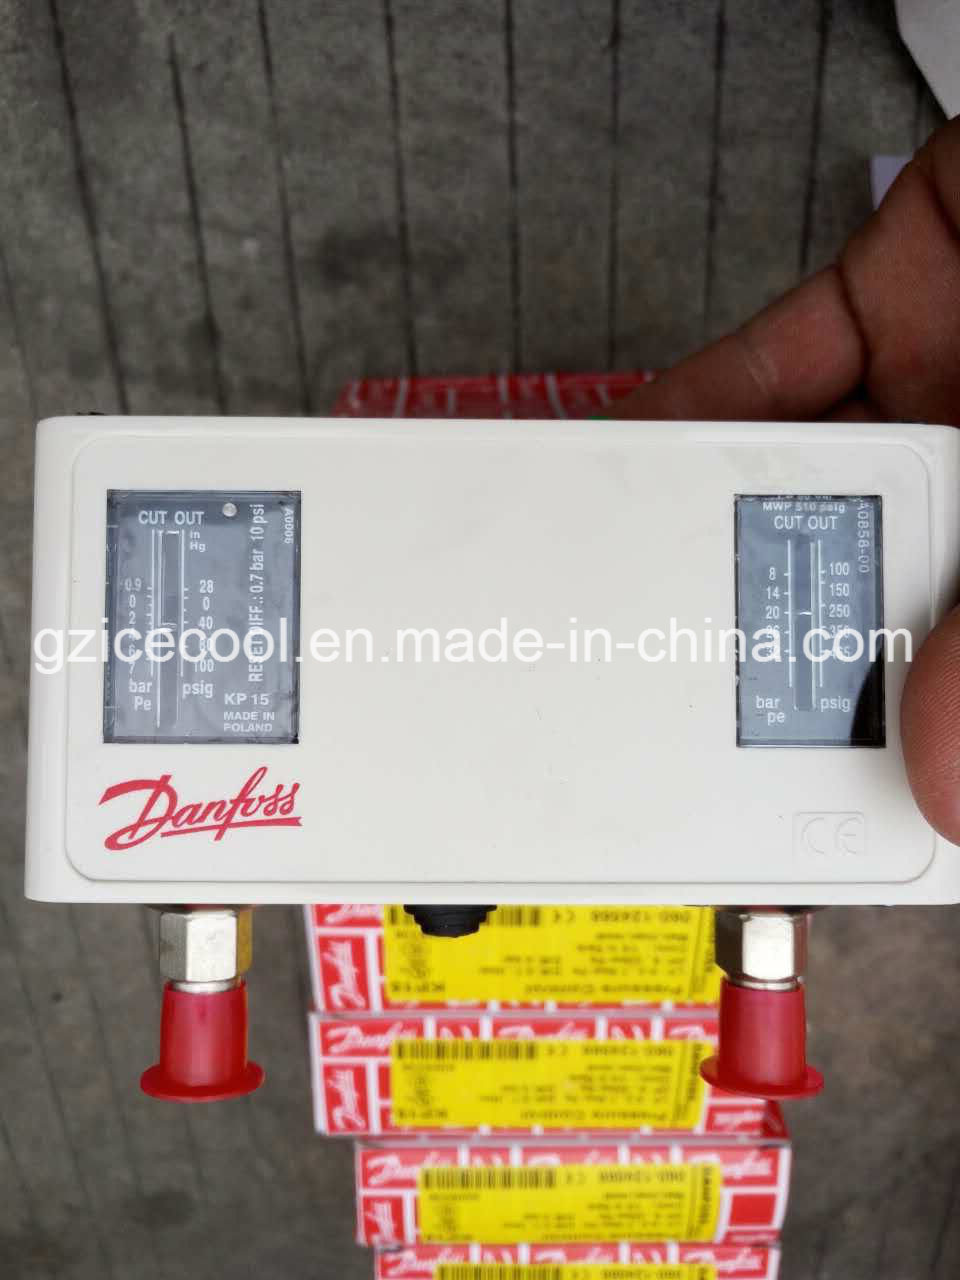 Made in Poland Danfoss Kp15 Dual Manul Reset Pressure Control 060-124566 for Condensing Unit